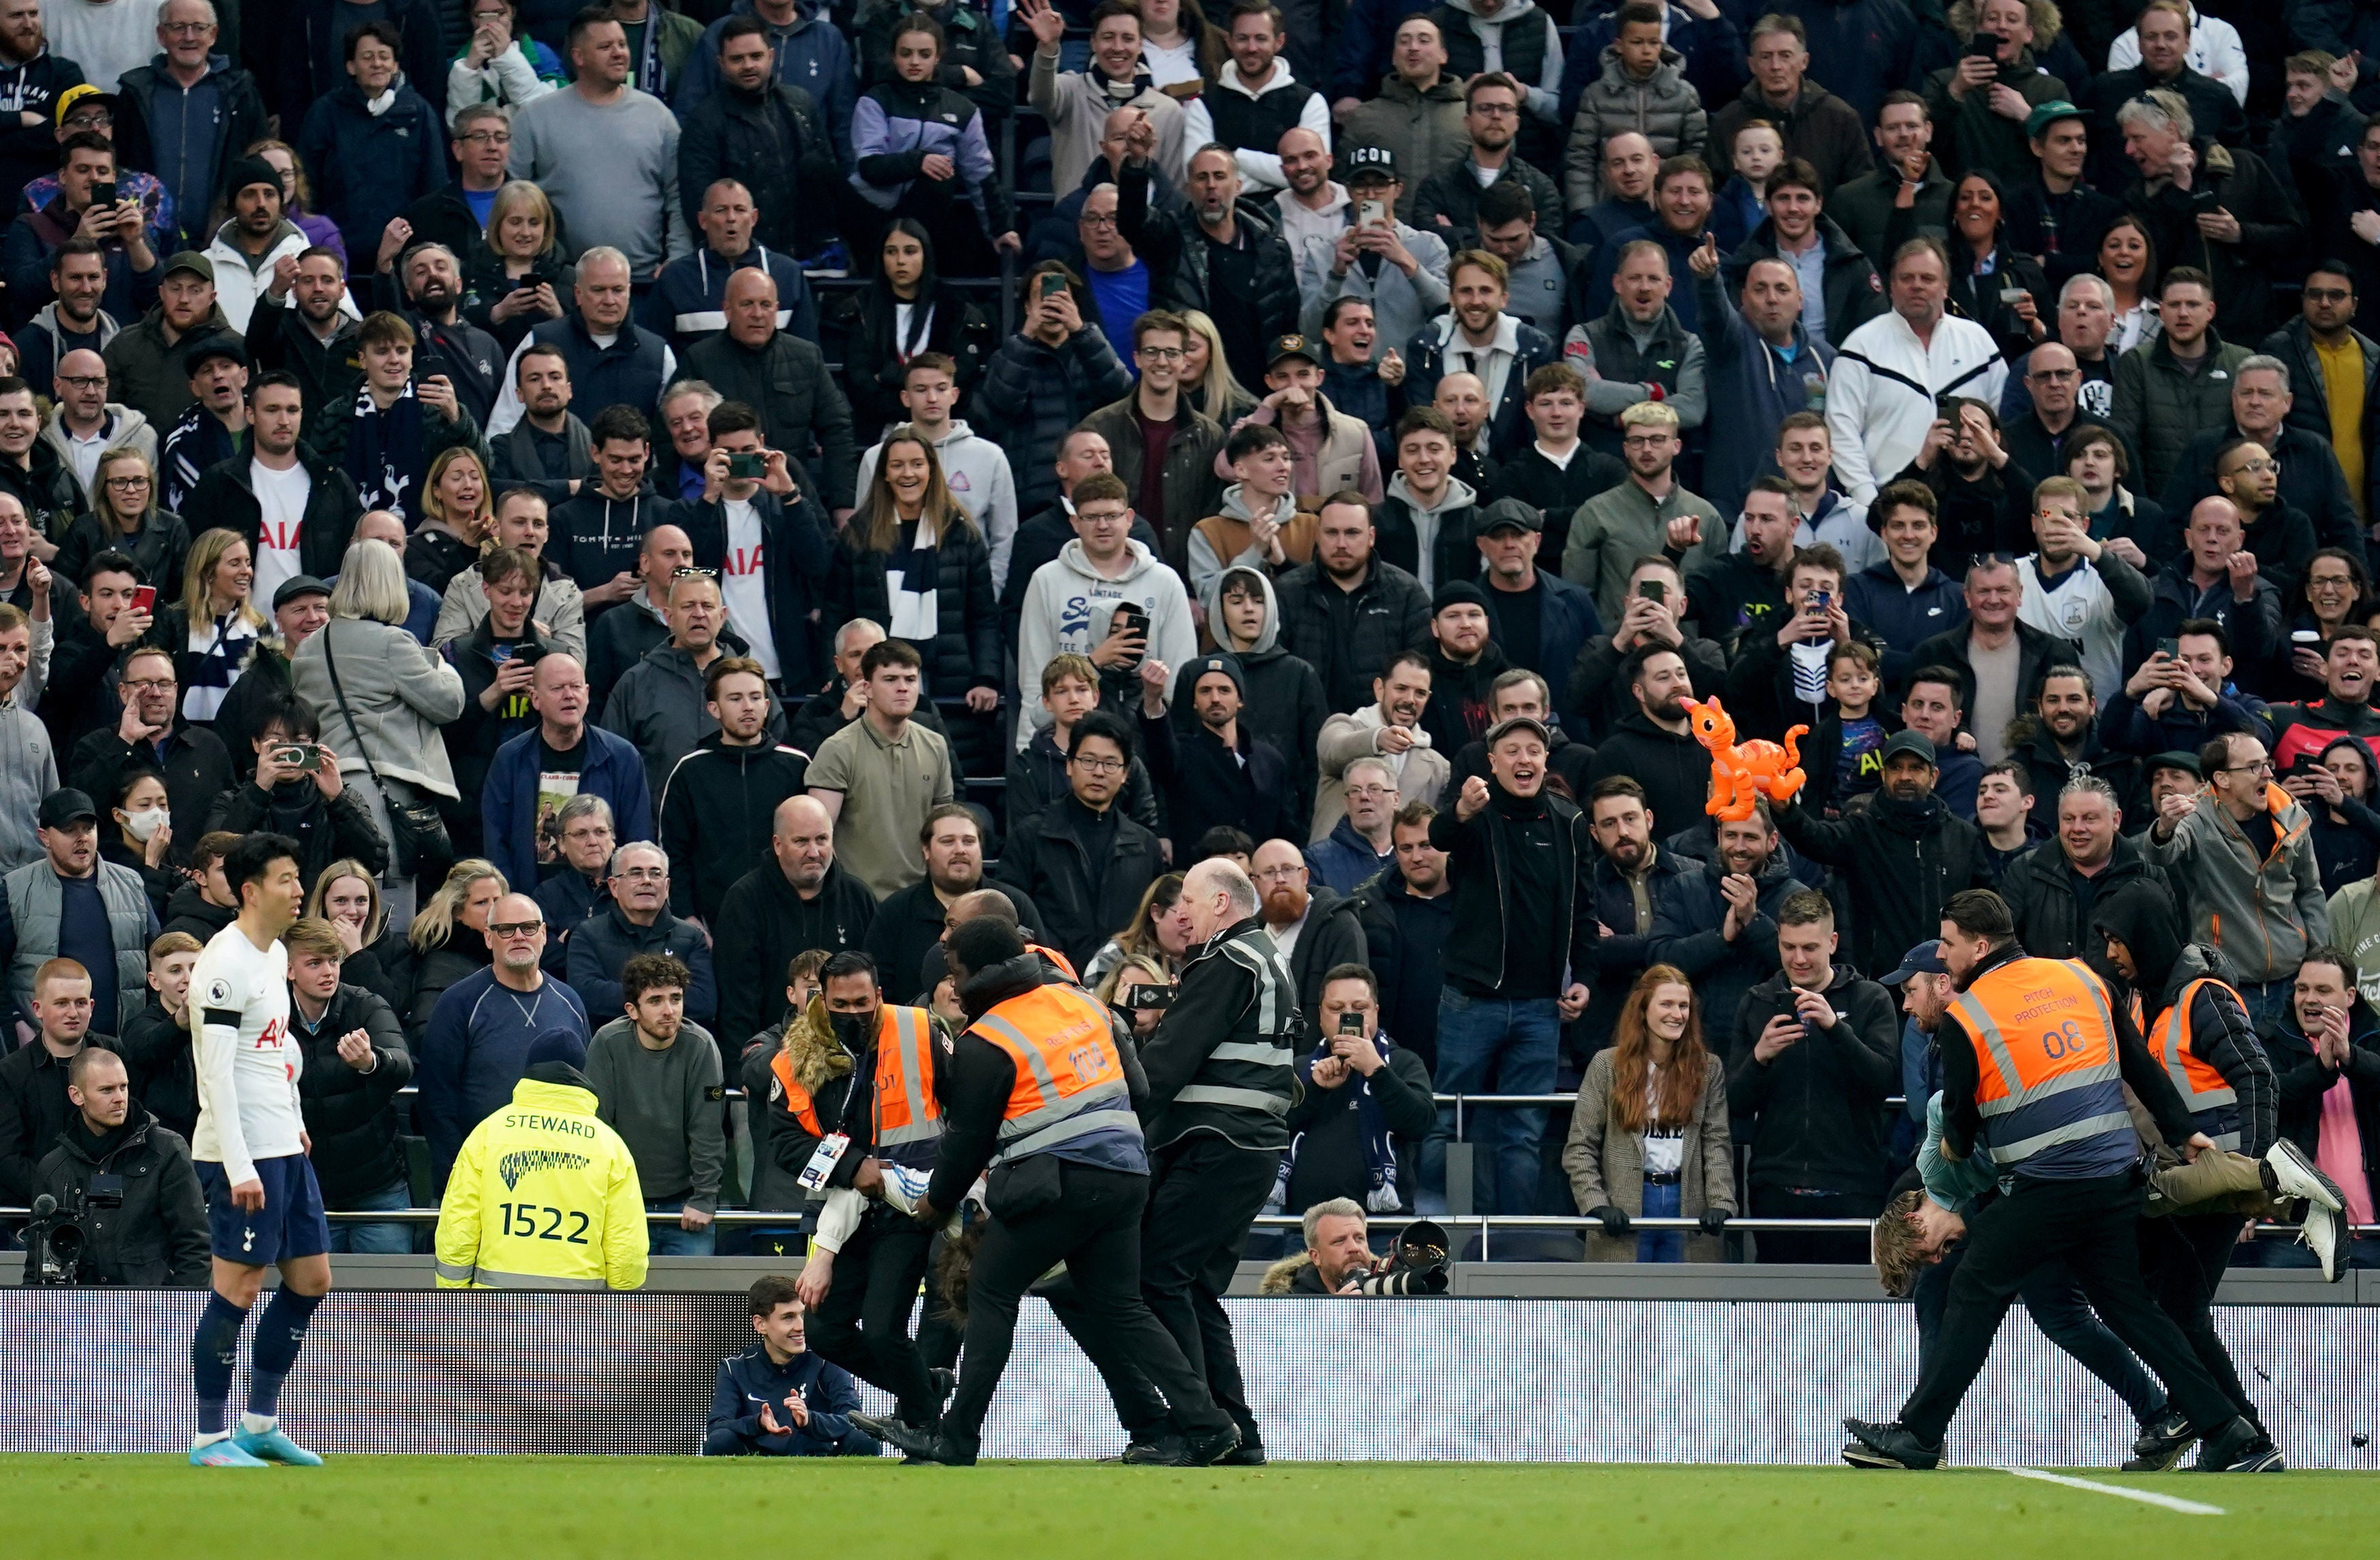 Nathan McGovern is dragged from the pitch at the Tottenham Hotspur v West Ham game in London on Sunday 20 March